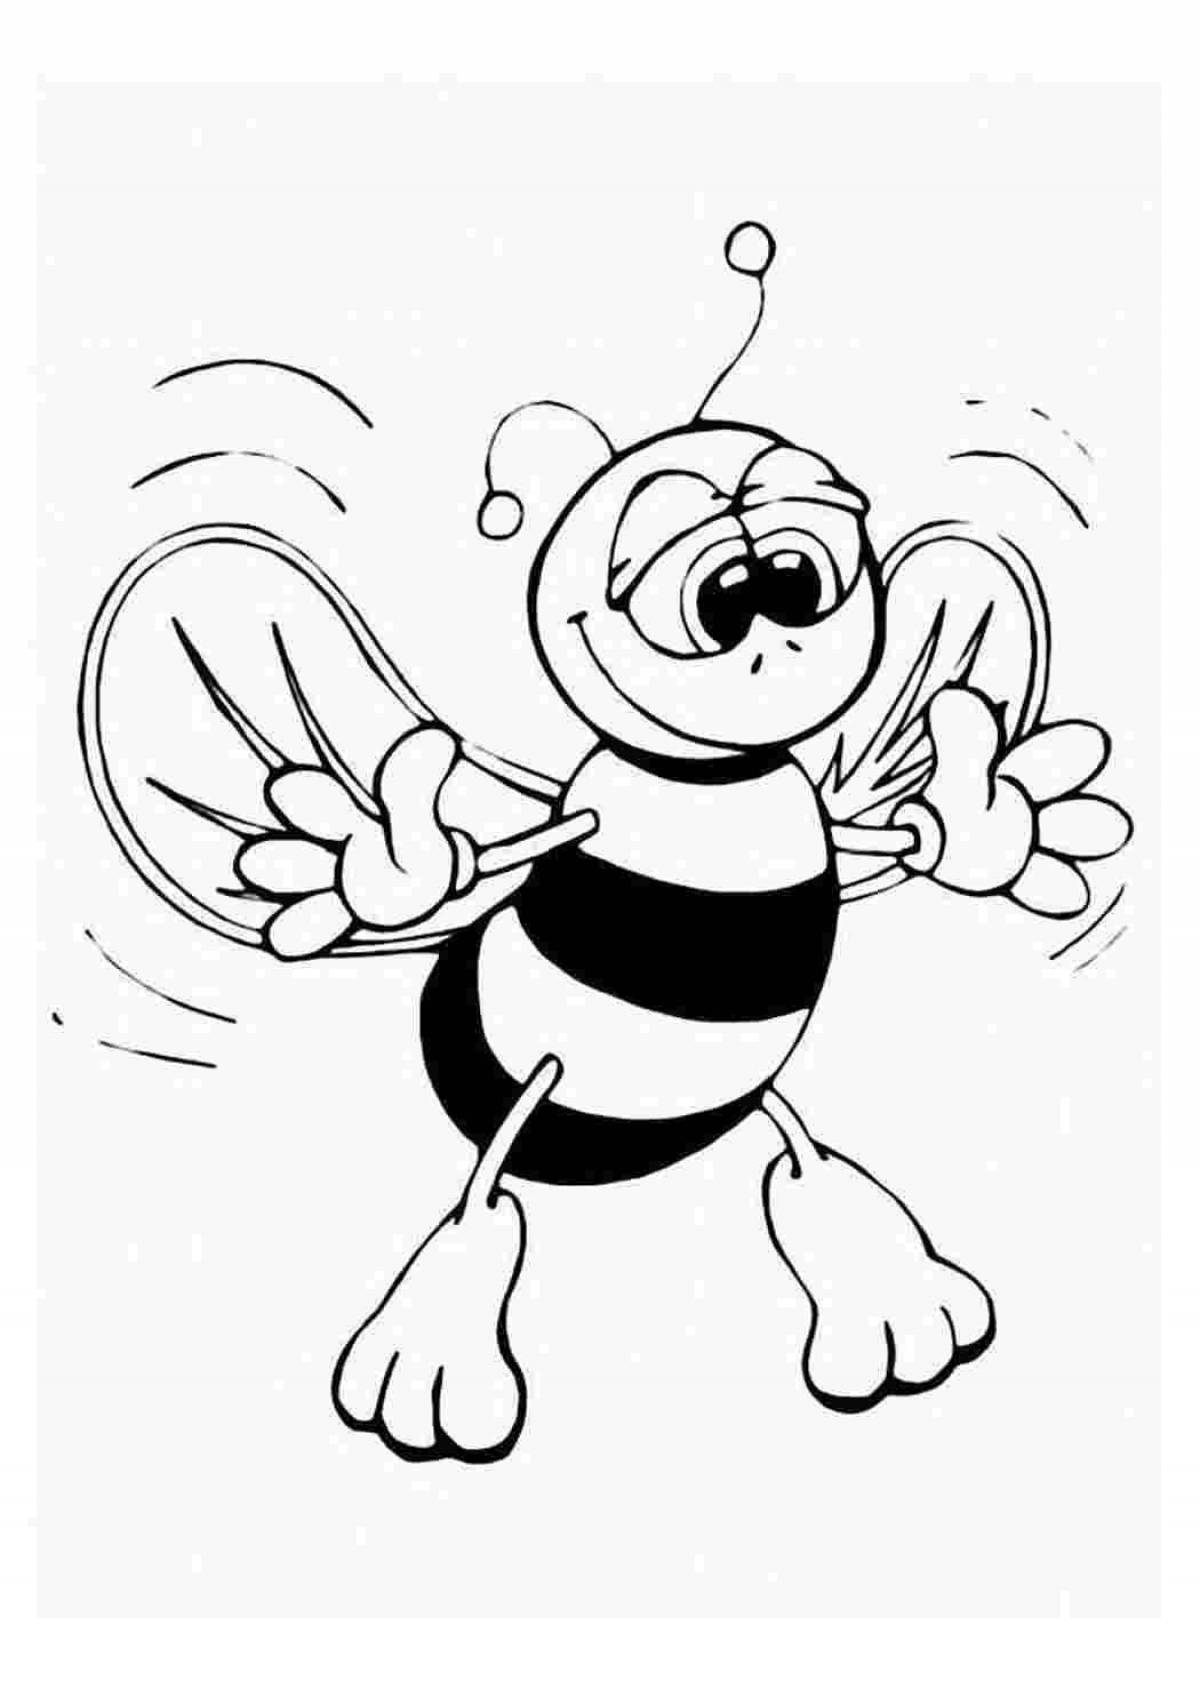 Animated cat and bee coloring page